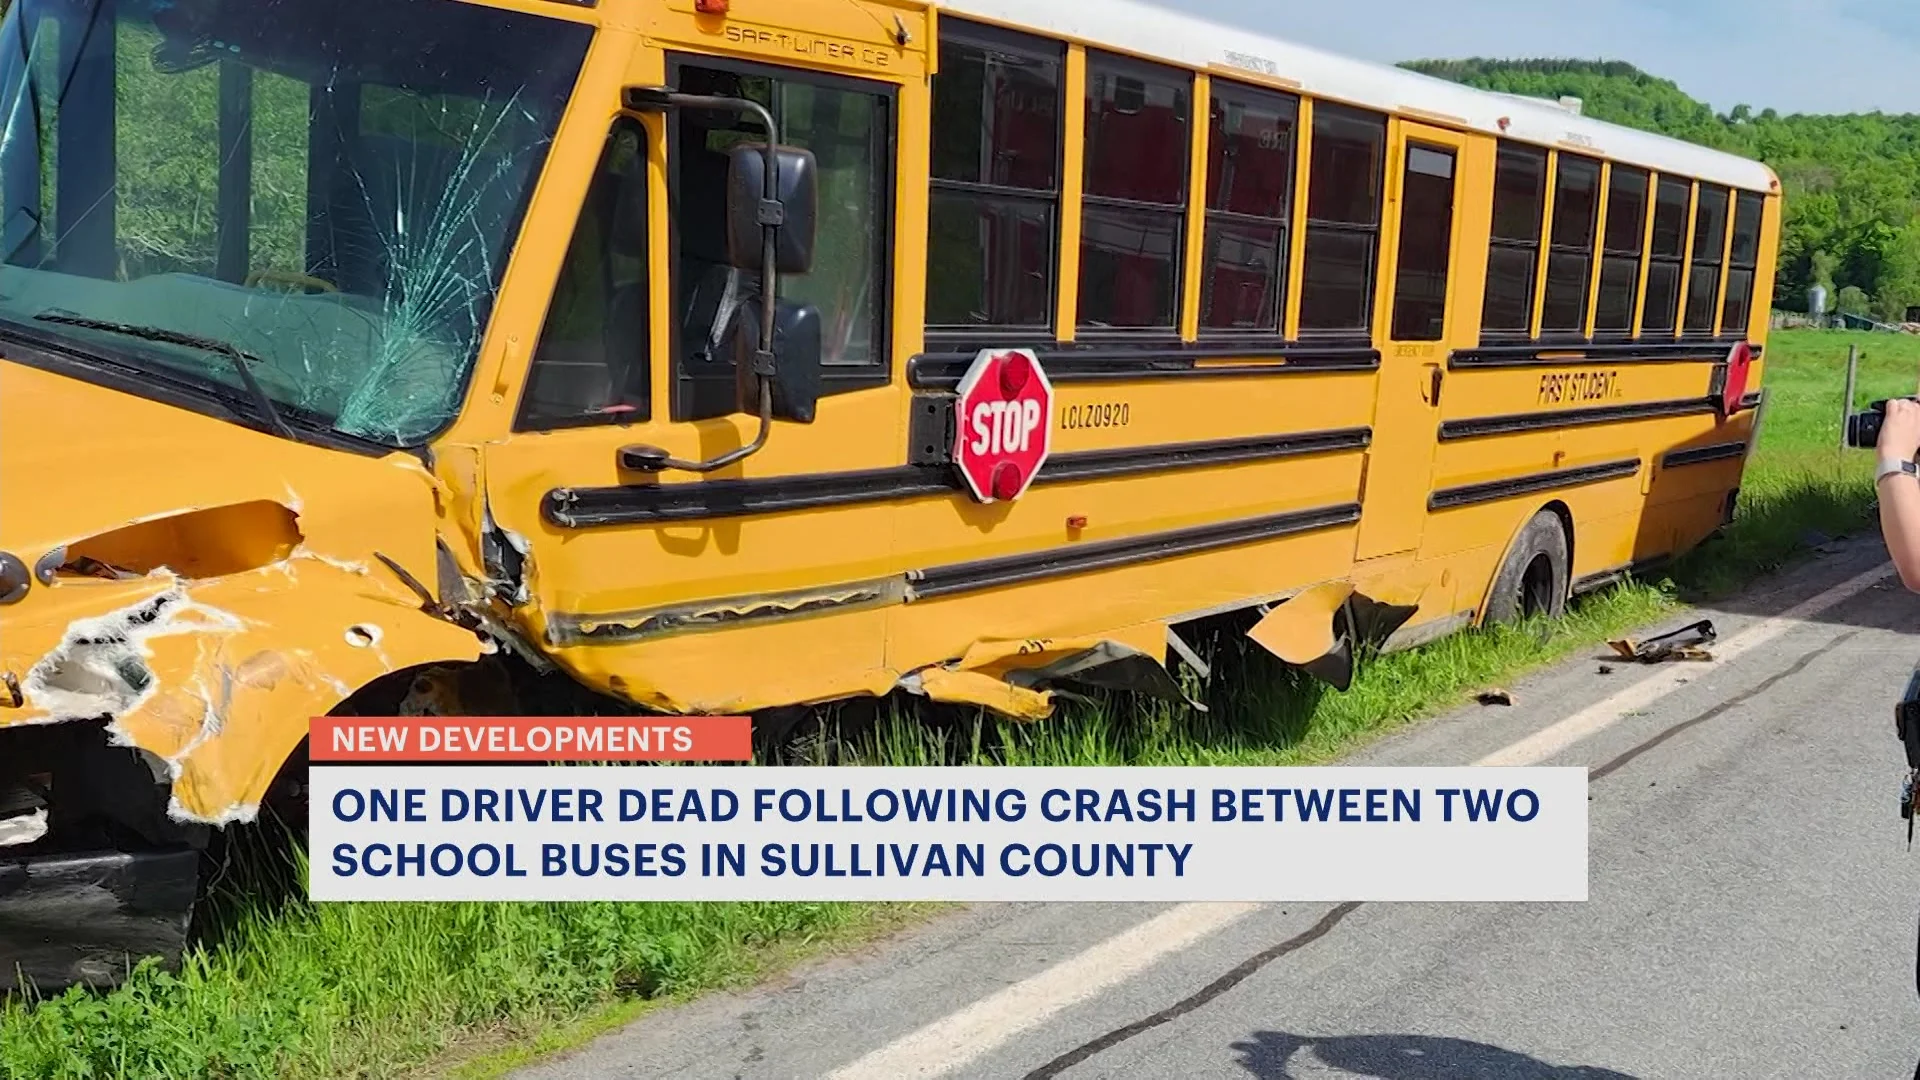 County manager: School bus driver dies in collision with another school bus